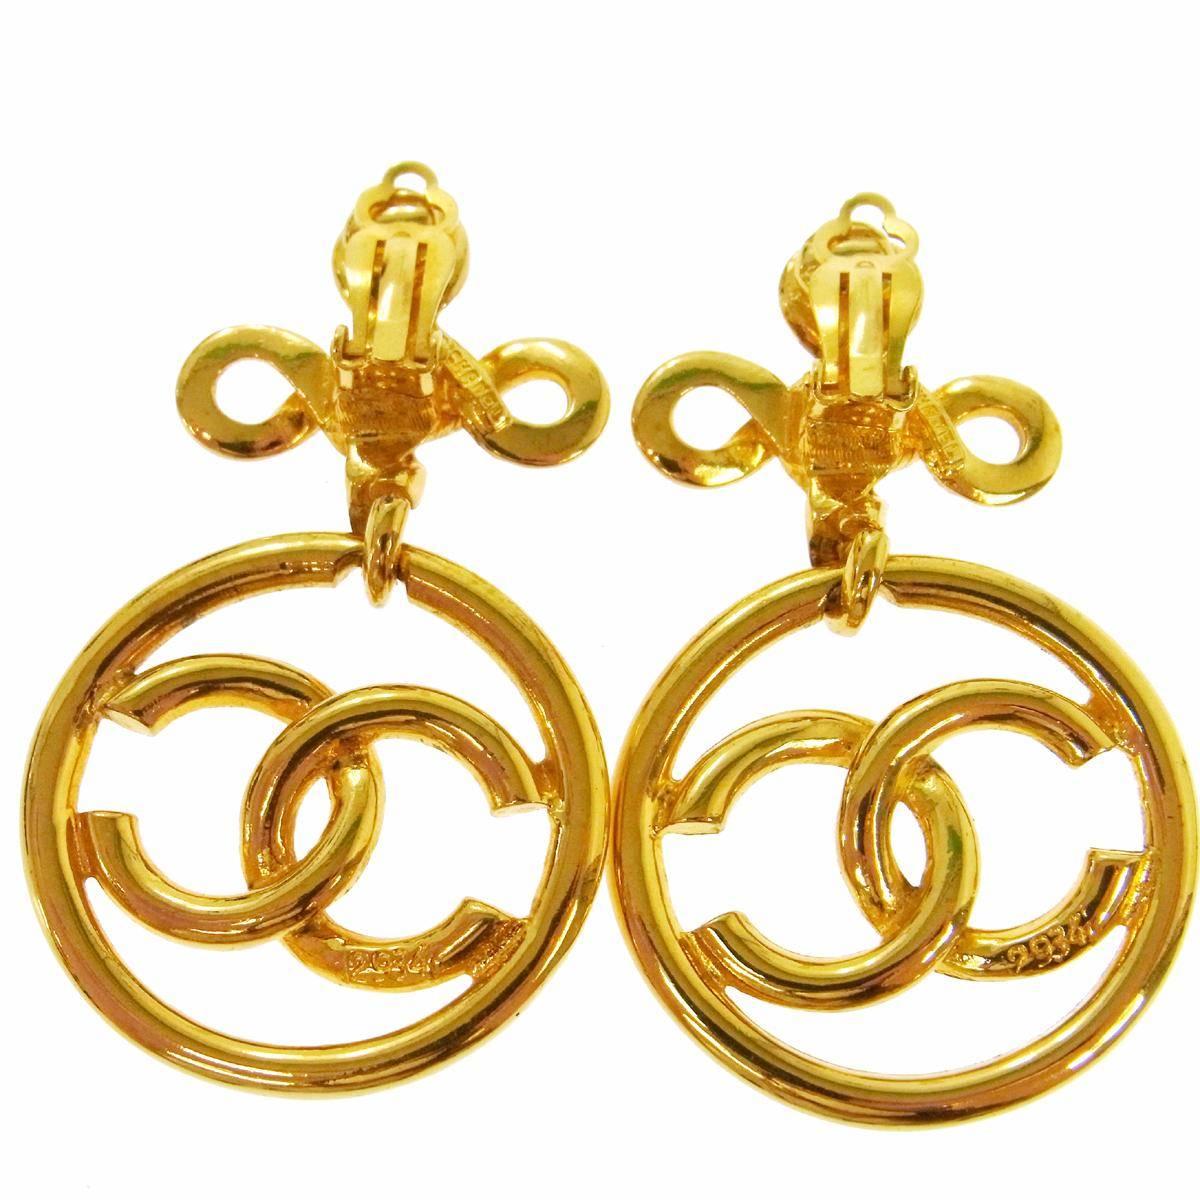 CURATOR'S NOTES  

Chanel Vintage Gold Curly Spiral Charm Dangle Drop Hoop Earrings  

Metal 
Gold tone 
Clip on closure  
Width 1.5" 
Drop 2.2"